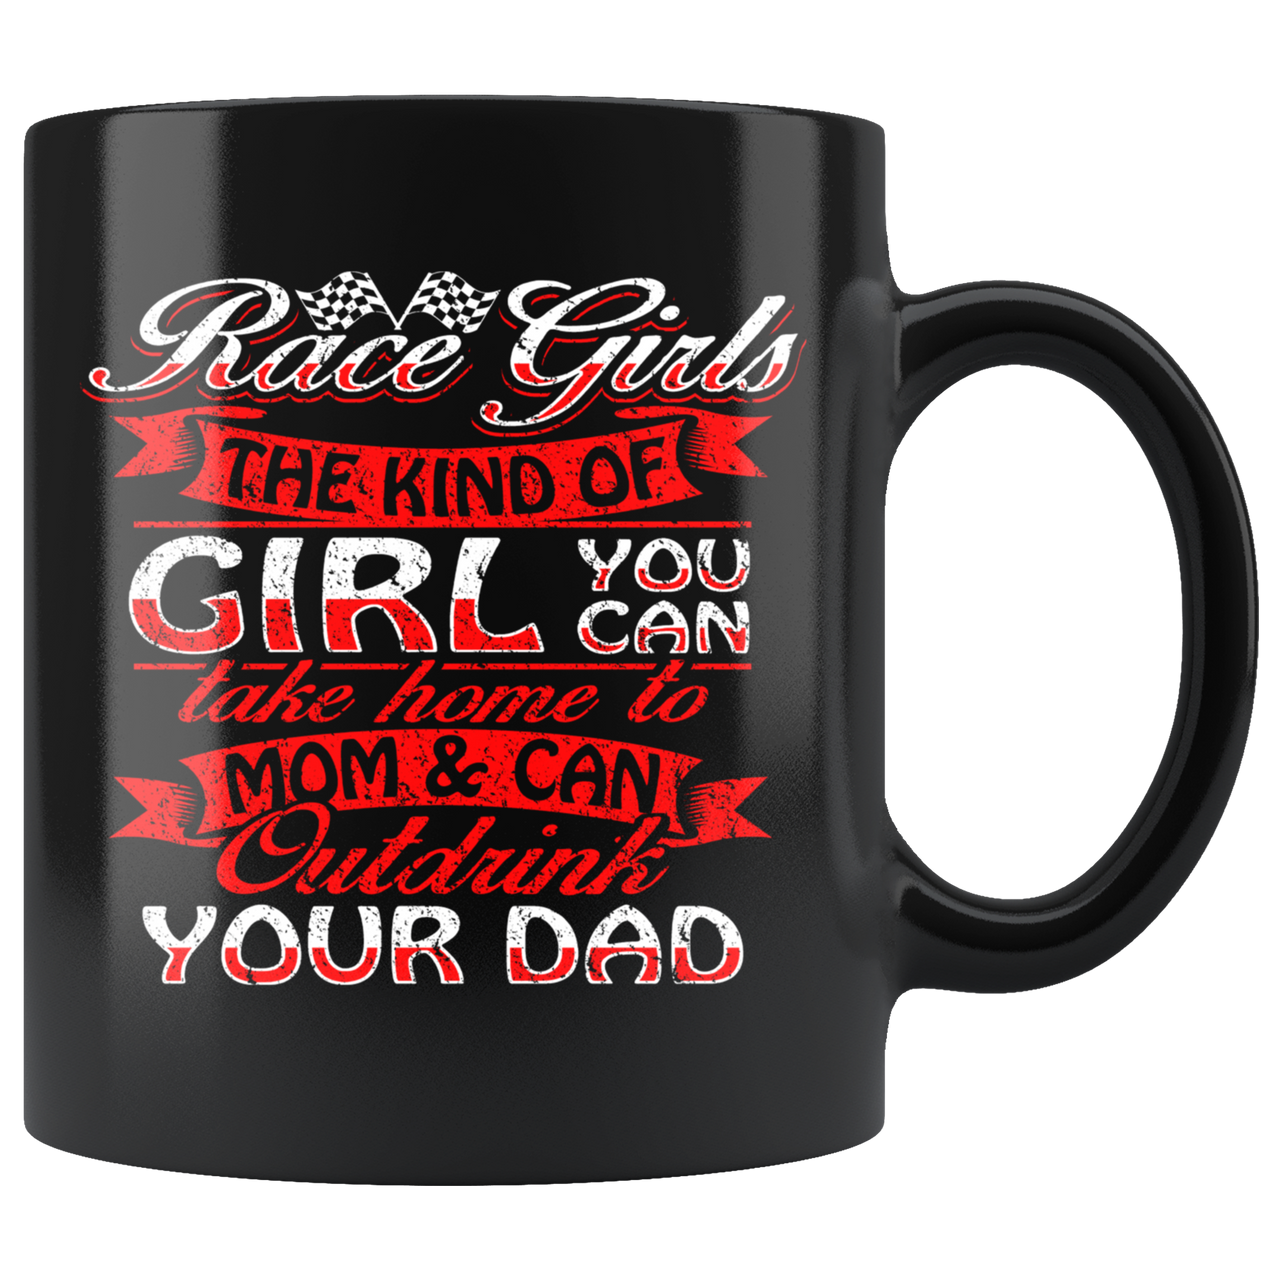 Race Girls The Kind Of Girl You Can Take Home To Mom & Can Outdrink Your Dad Mug!